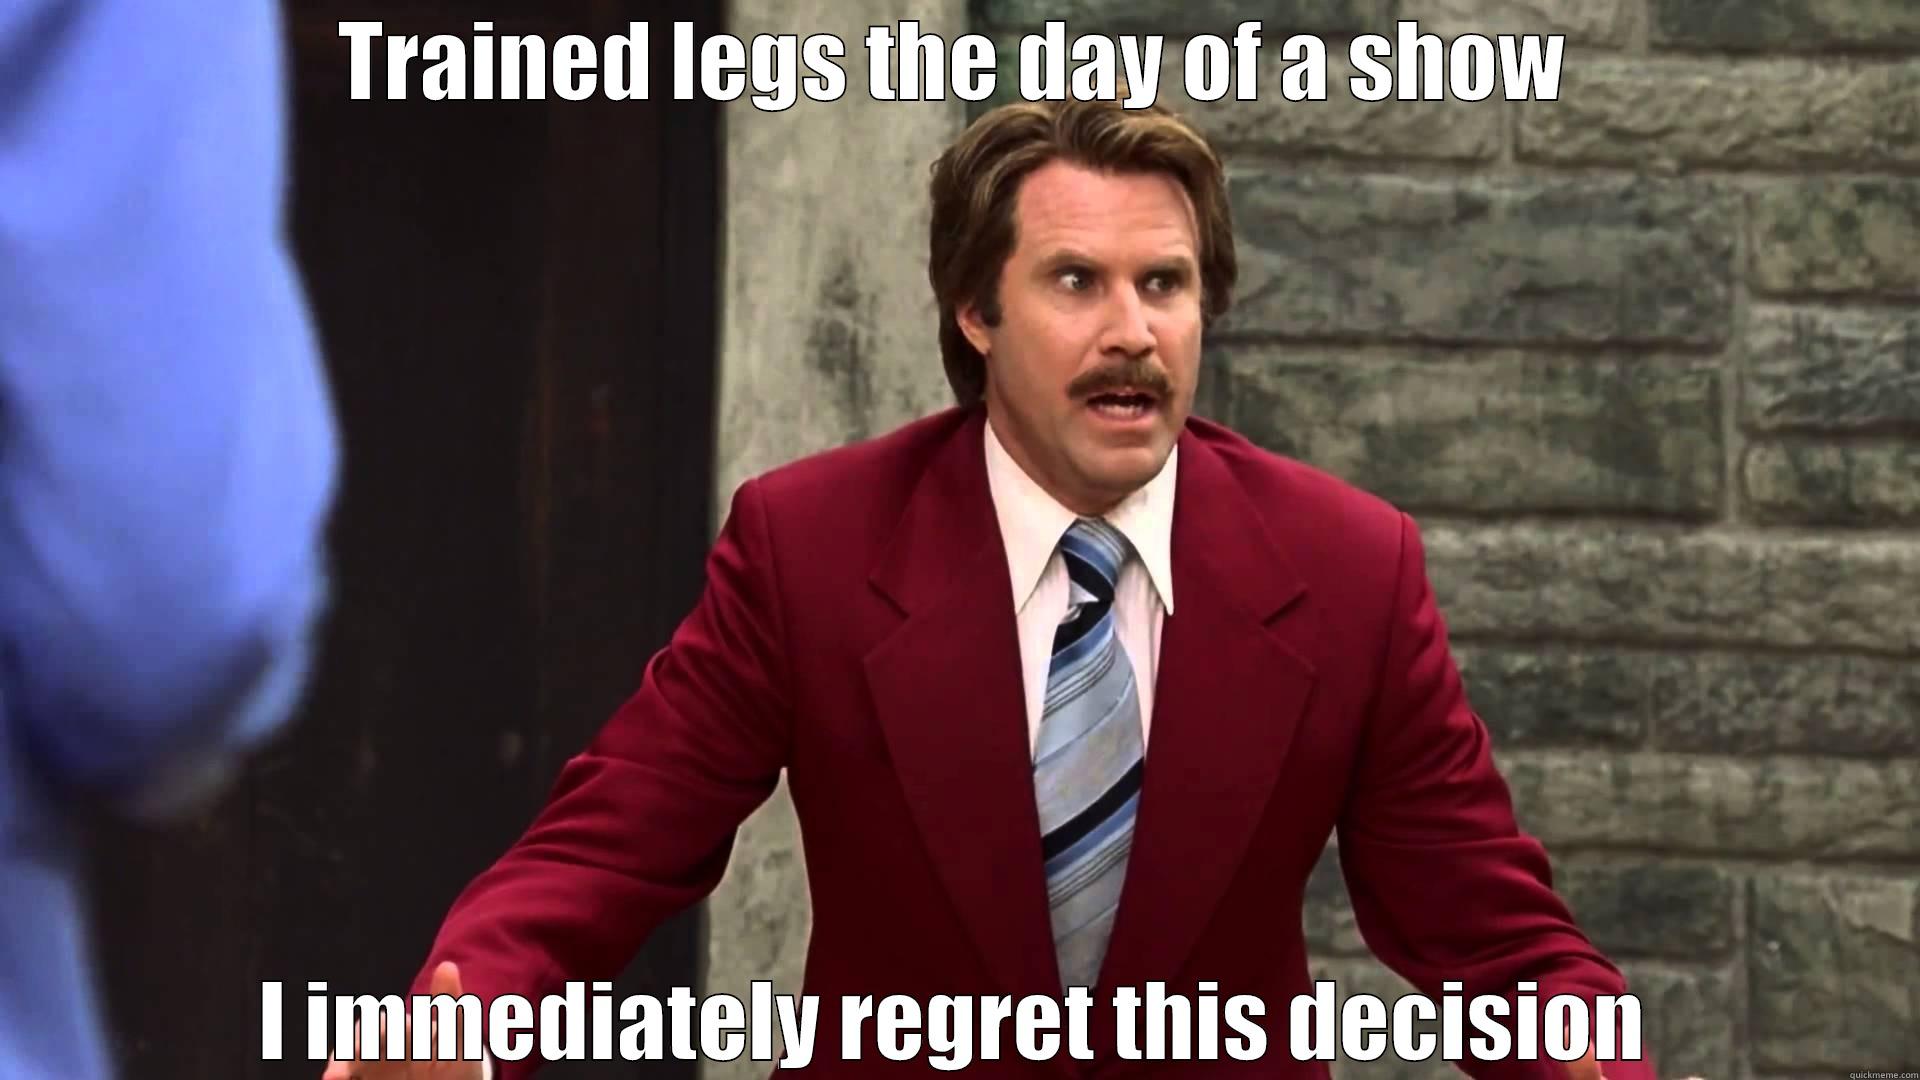 Ron Raving Burgundy - TRAINED LEGS THE DAY OF A SHOW I IMMEDIATELY REGRET THIS DECISION Misc